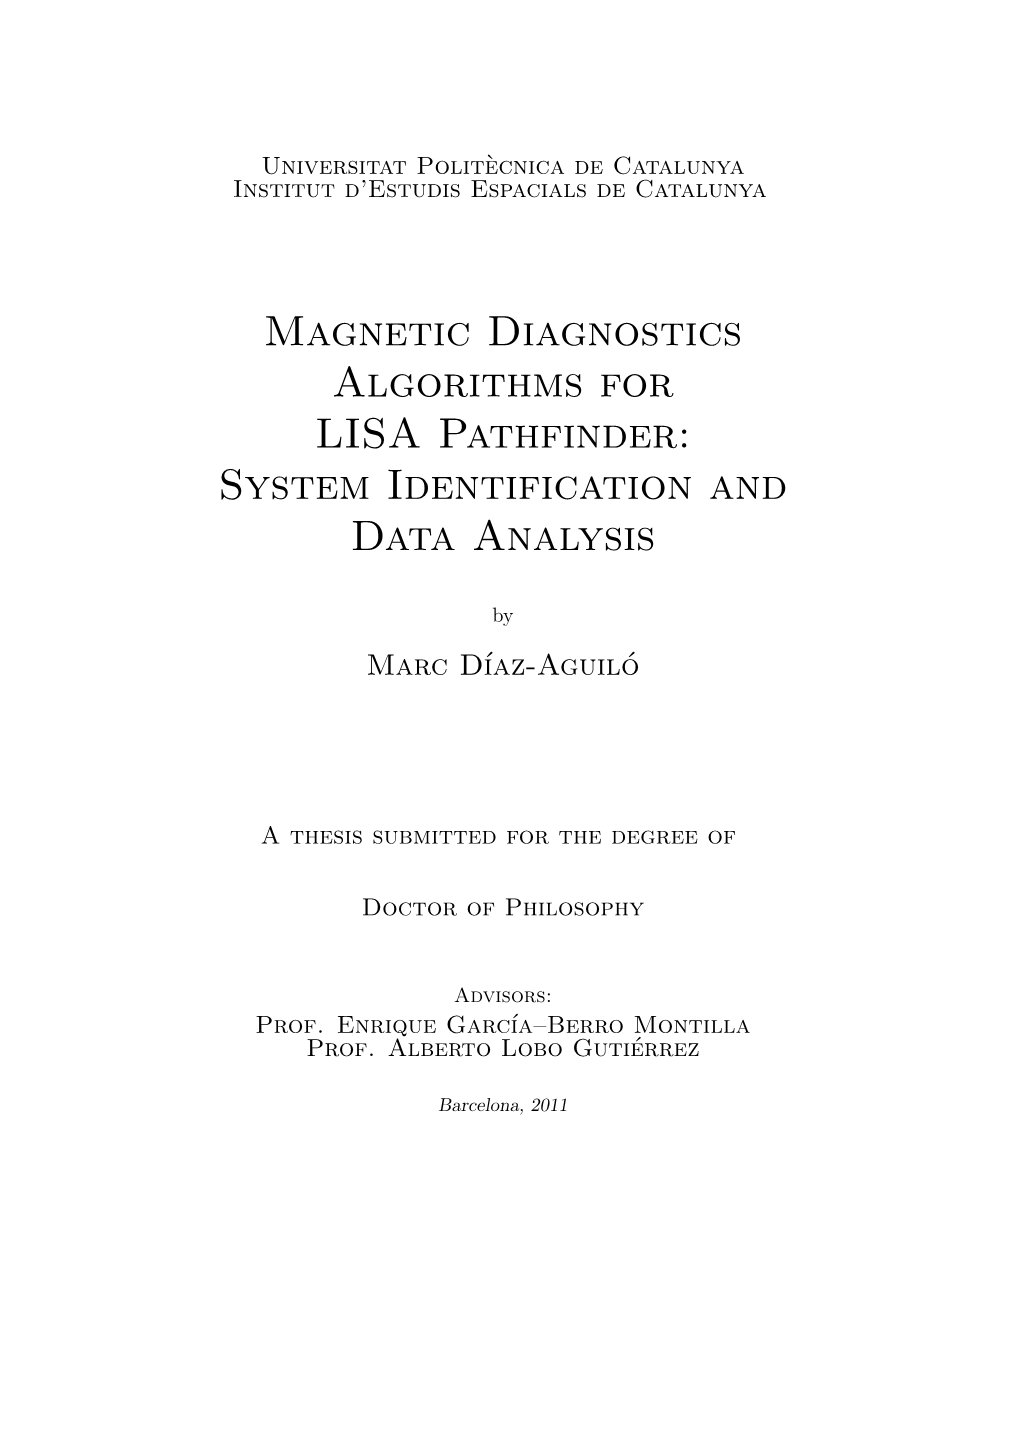 Magnetic Diagnostics Algorithms for LISA Pathfinder: System Identification and Data Analysis